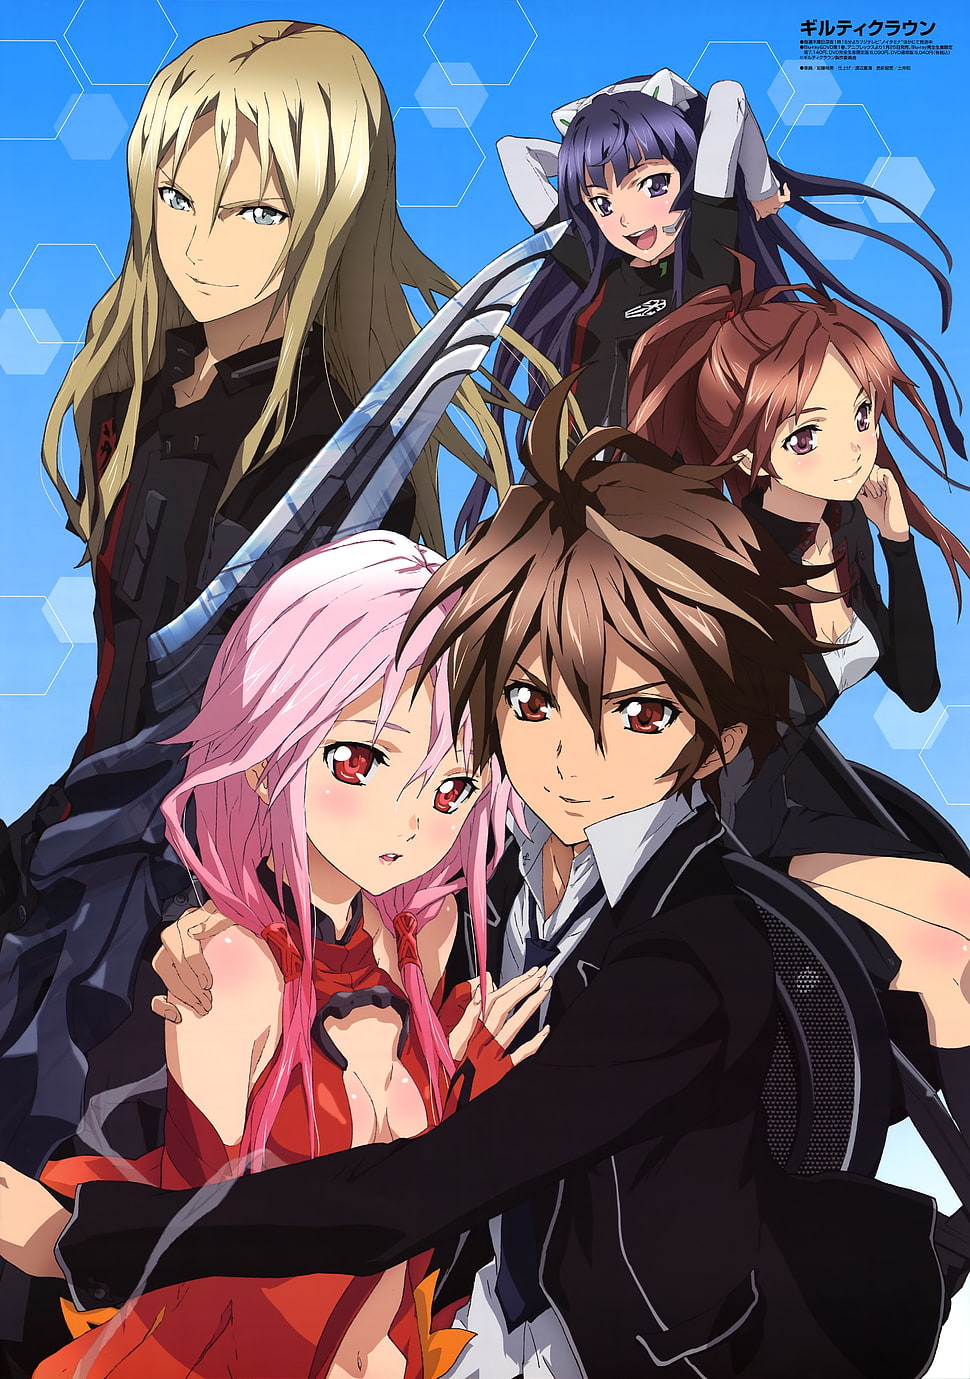 Characters appearing in Guilty Crown Anime